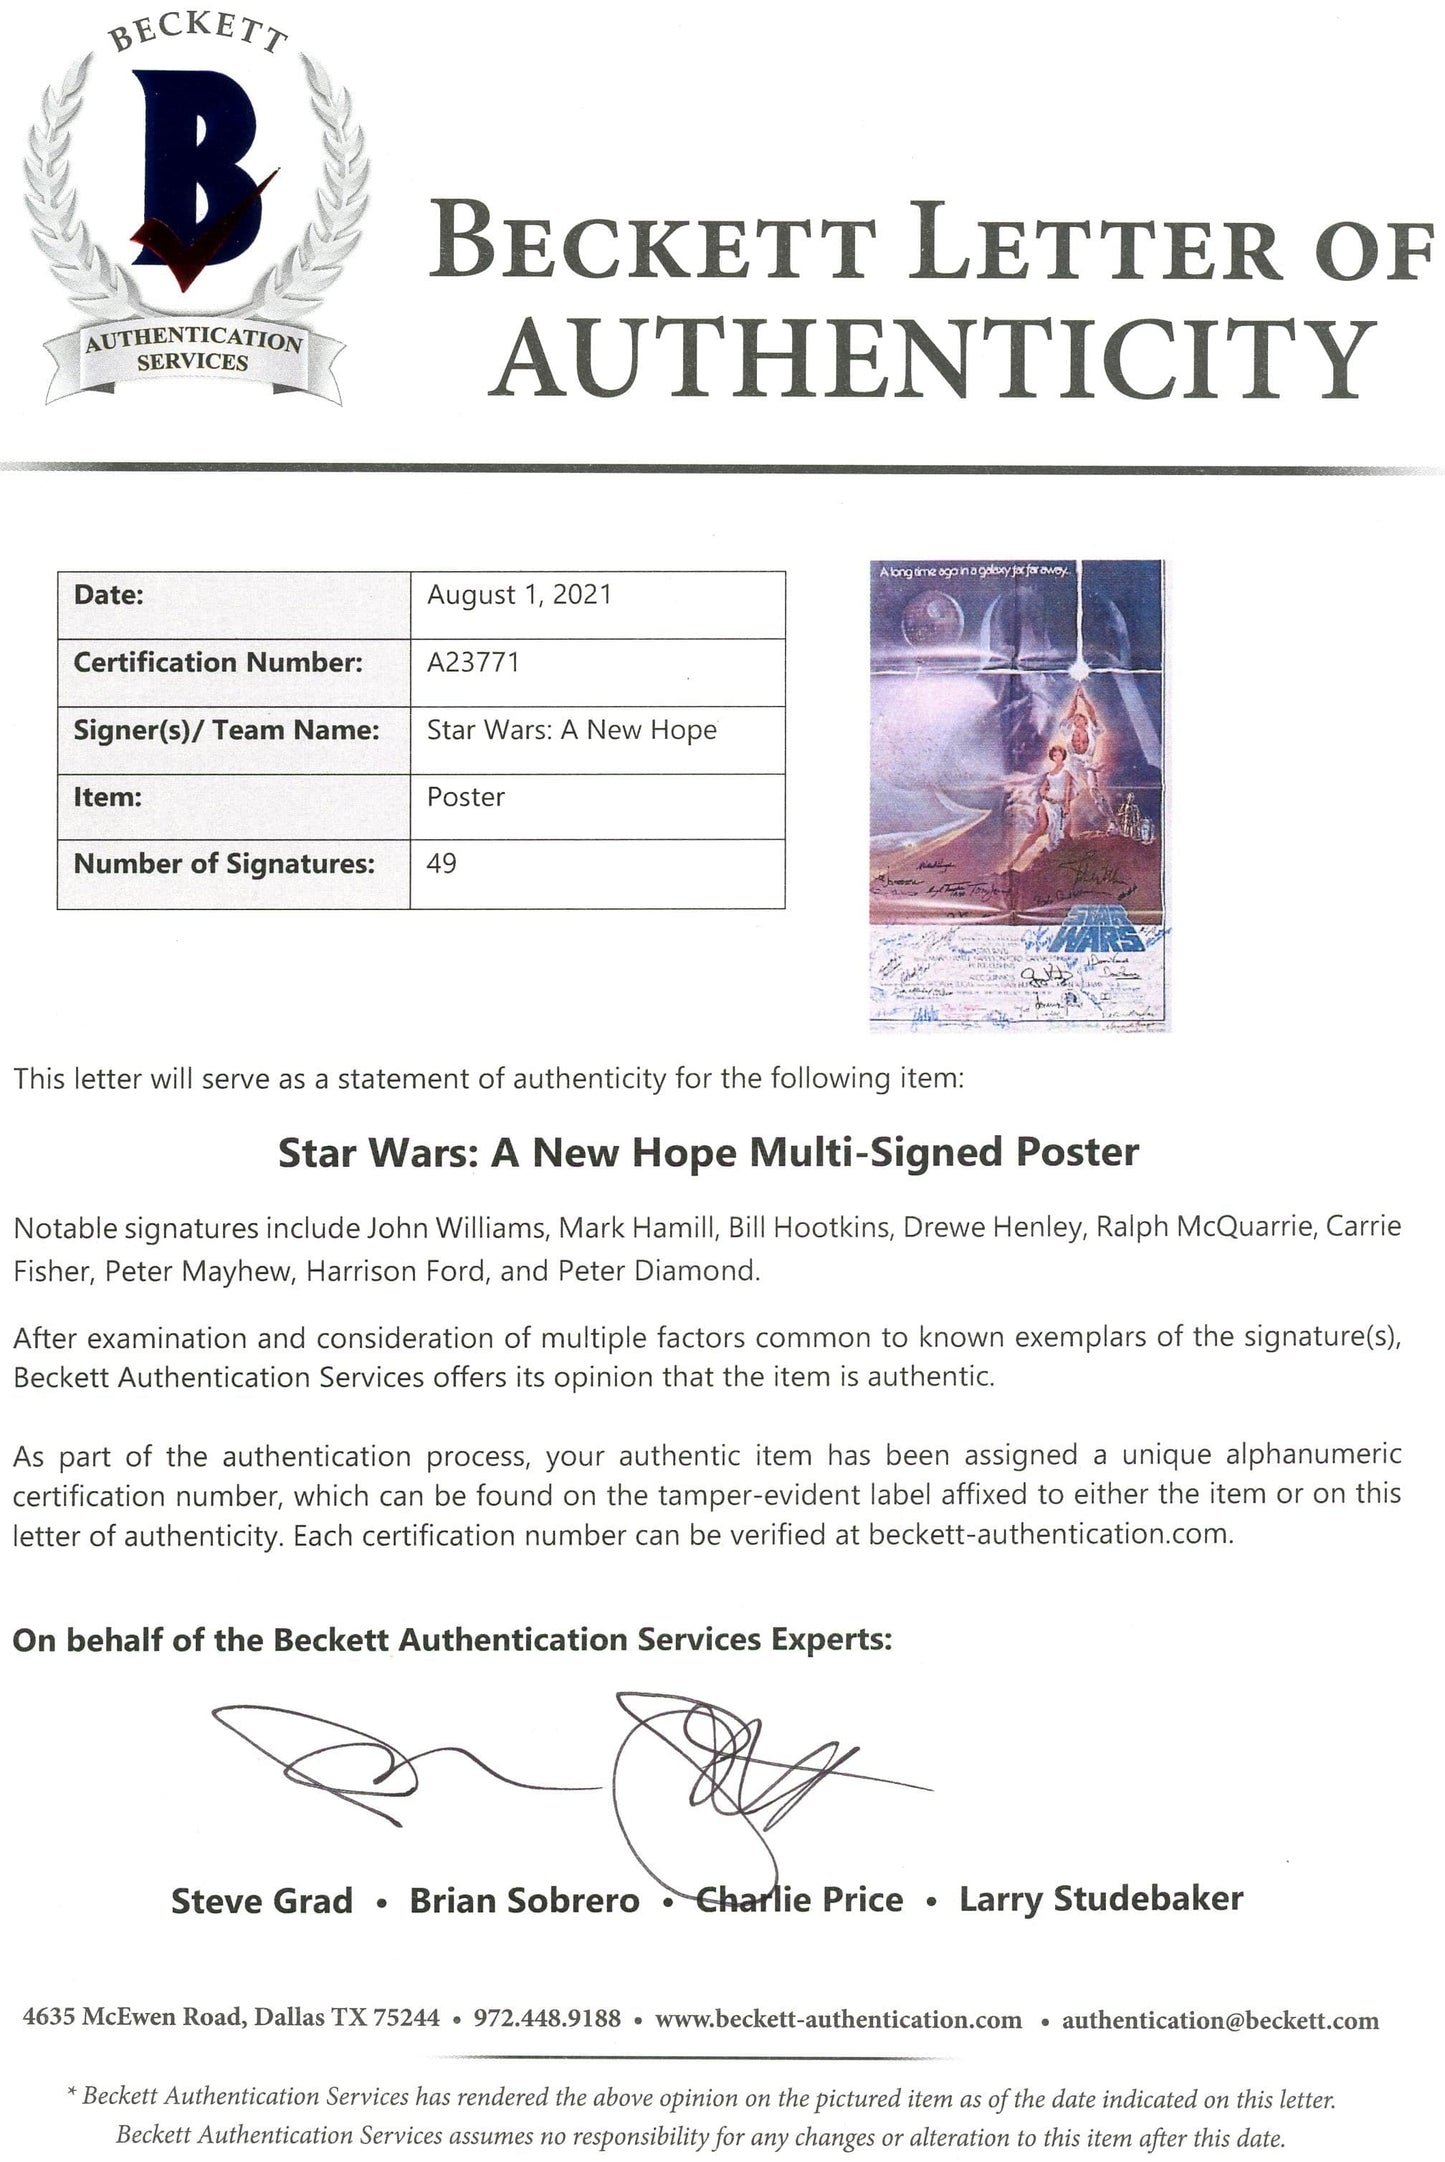 Star Wars: A New Hope Multi-Signed Poster COA